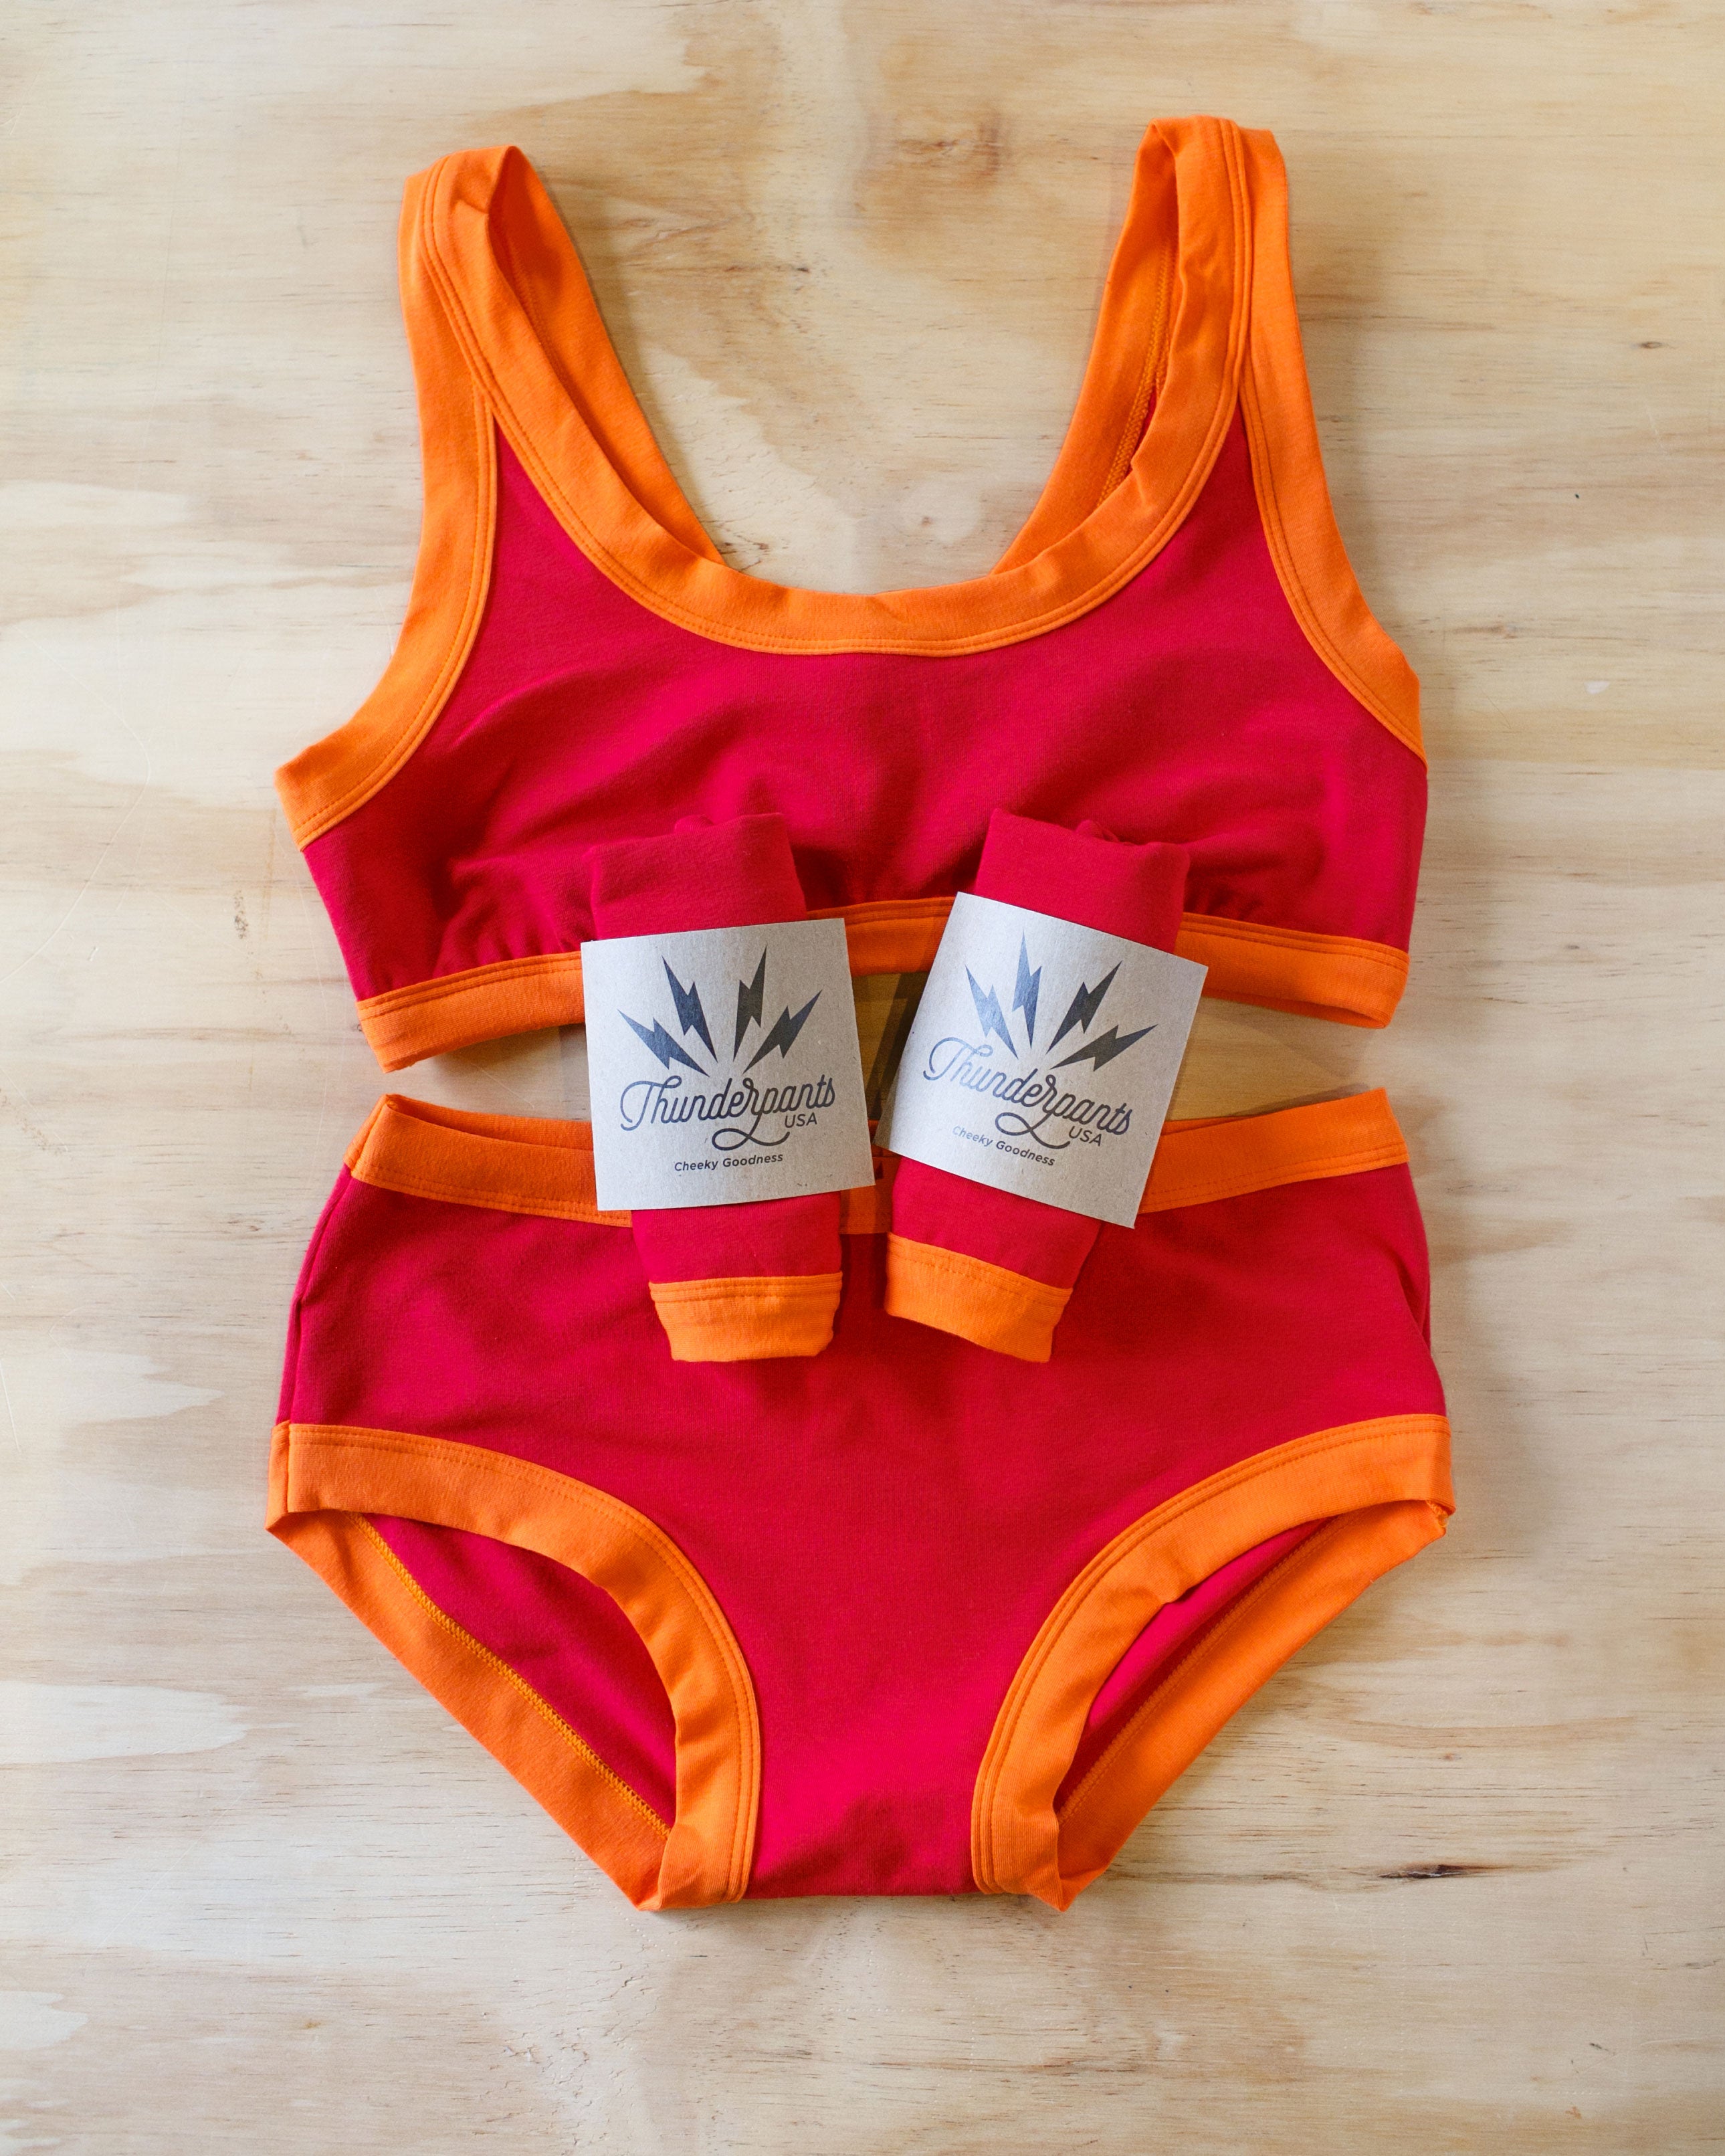 Flat lay on wood surface of Bralette, Hipster style underwear, and packaged underwear of Pants on Fire: red with orange bidning.